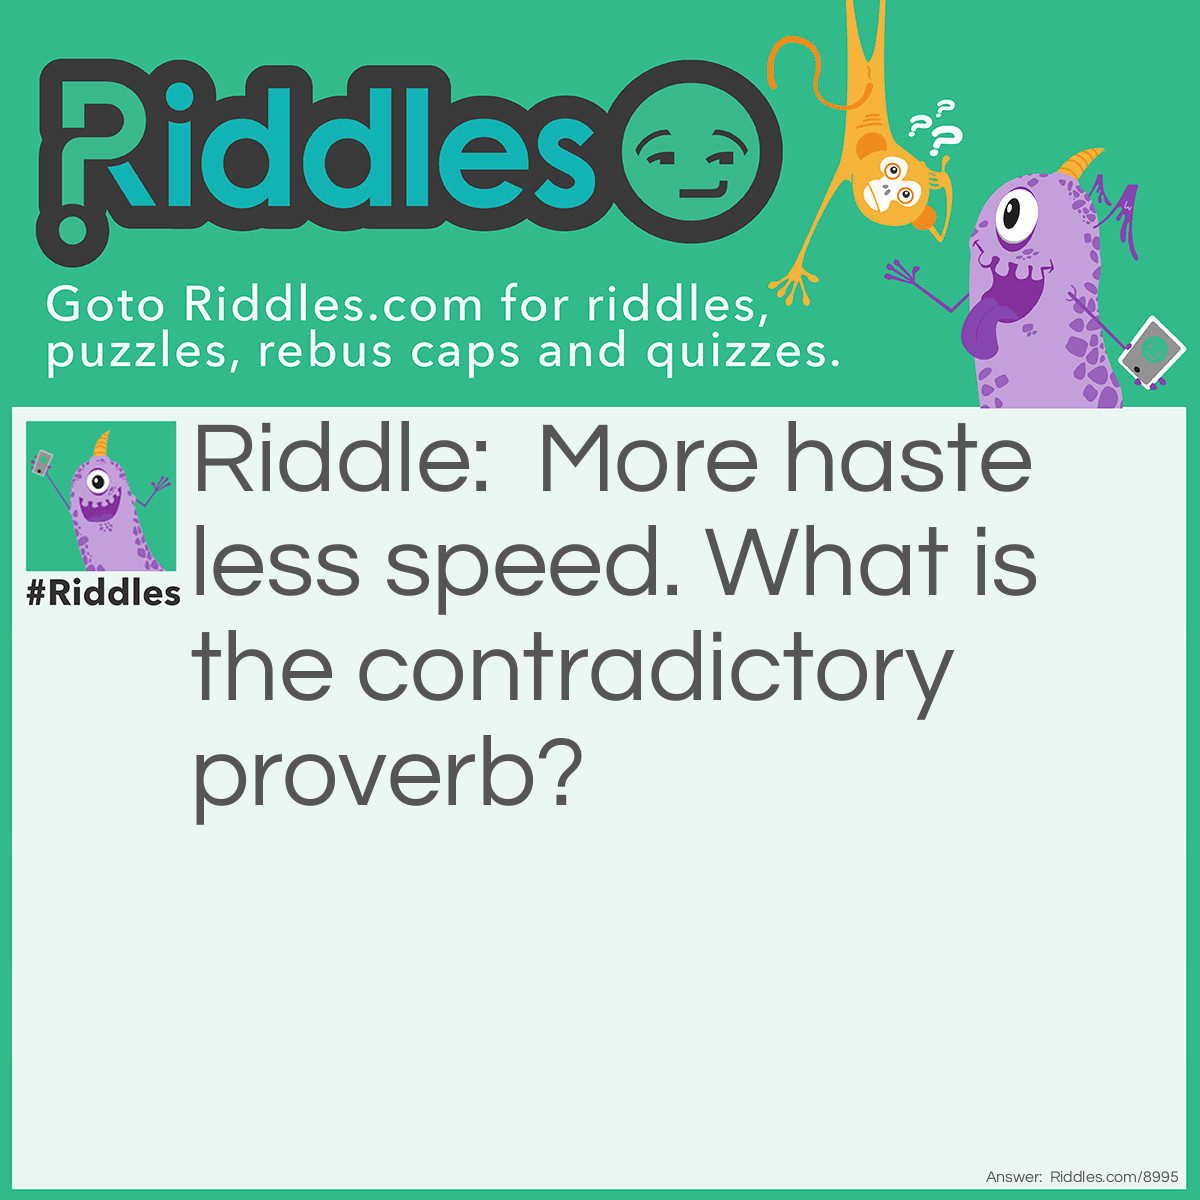 Riddle: More haste less speed. What is the contradictory proverb? Answer: Time waits for no man.